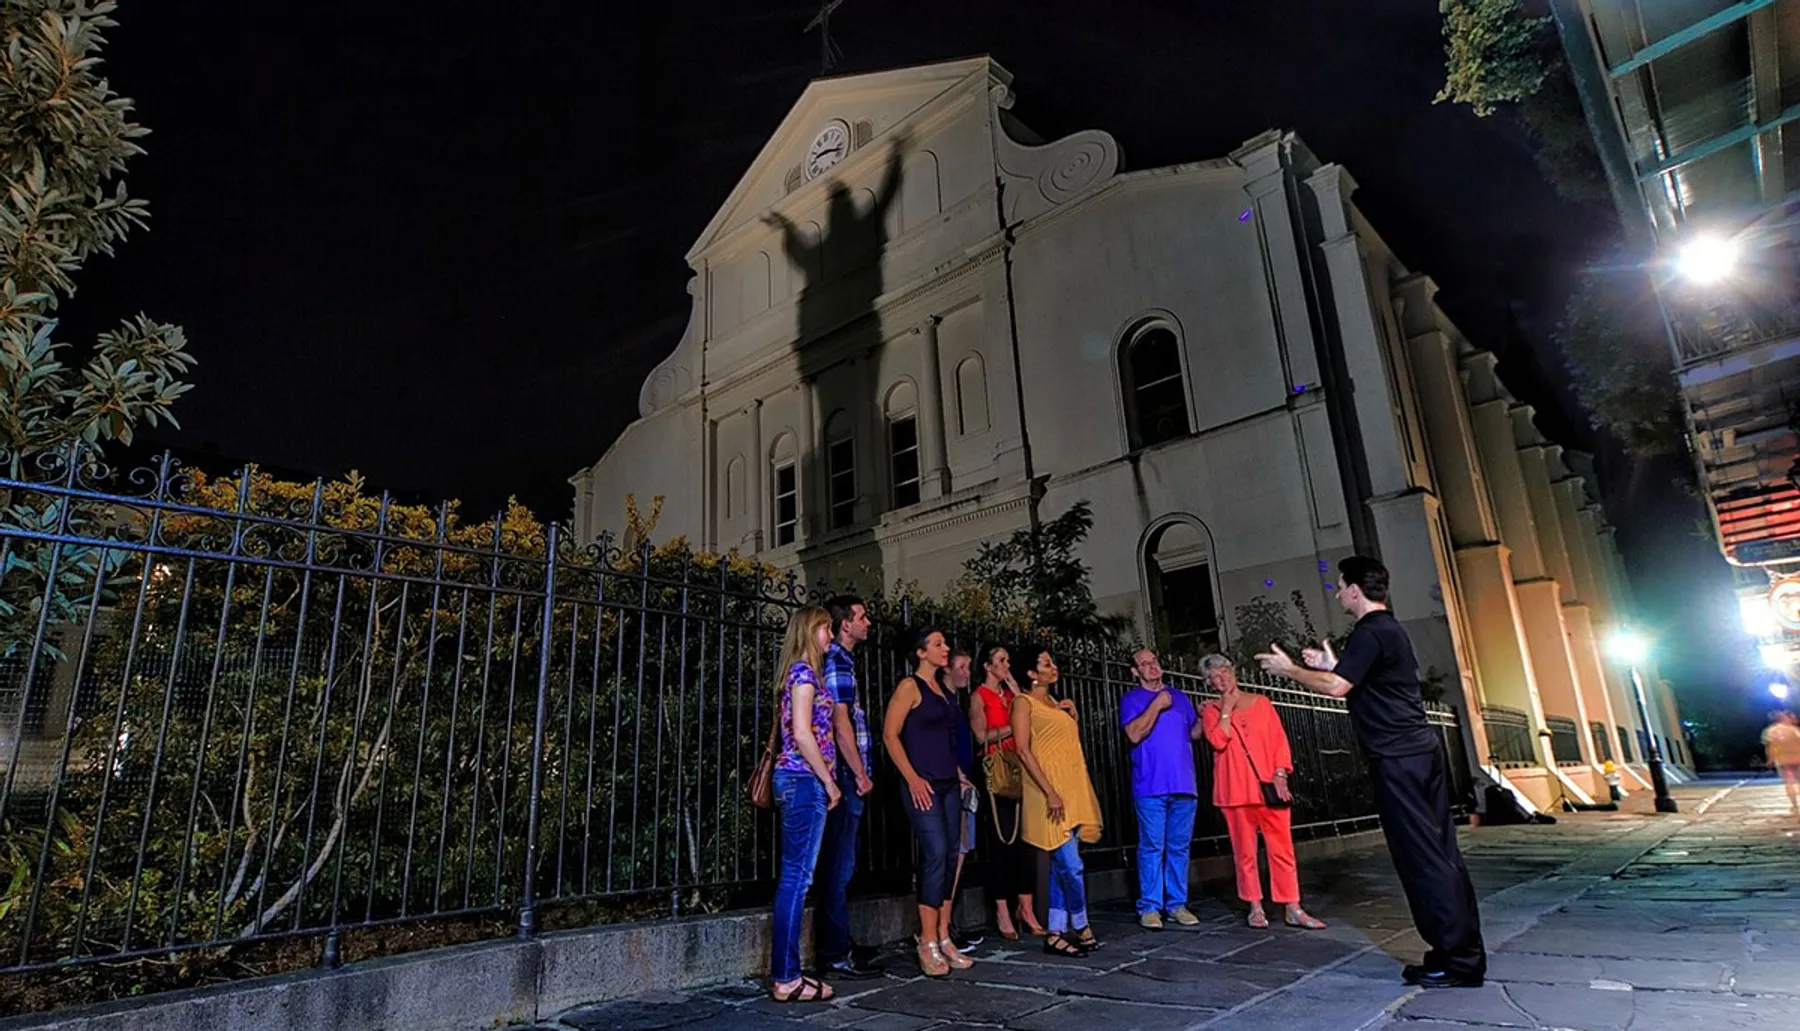 A group of people is attentively listening to a man gesturing while standing in front of a historical building at night.